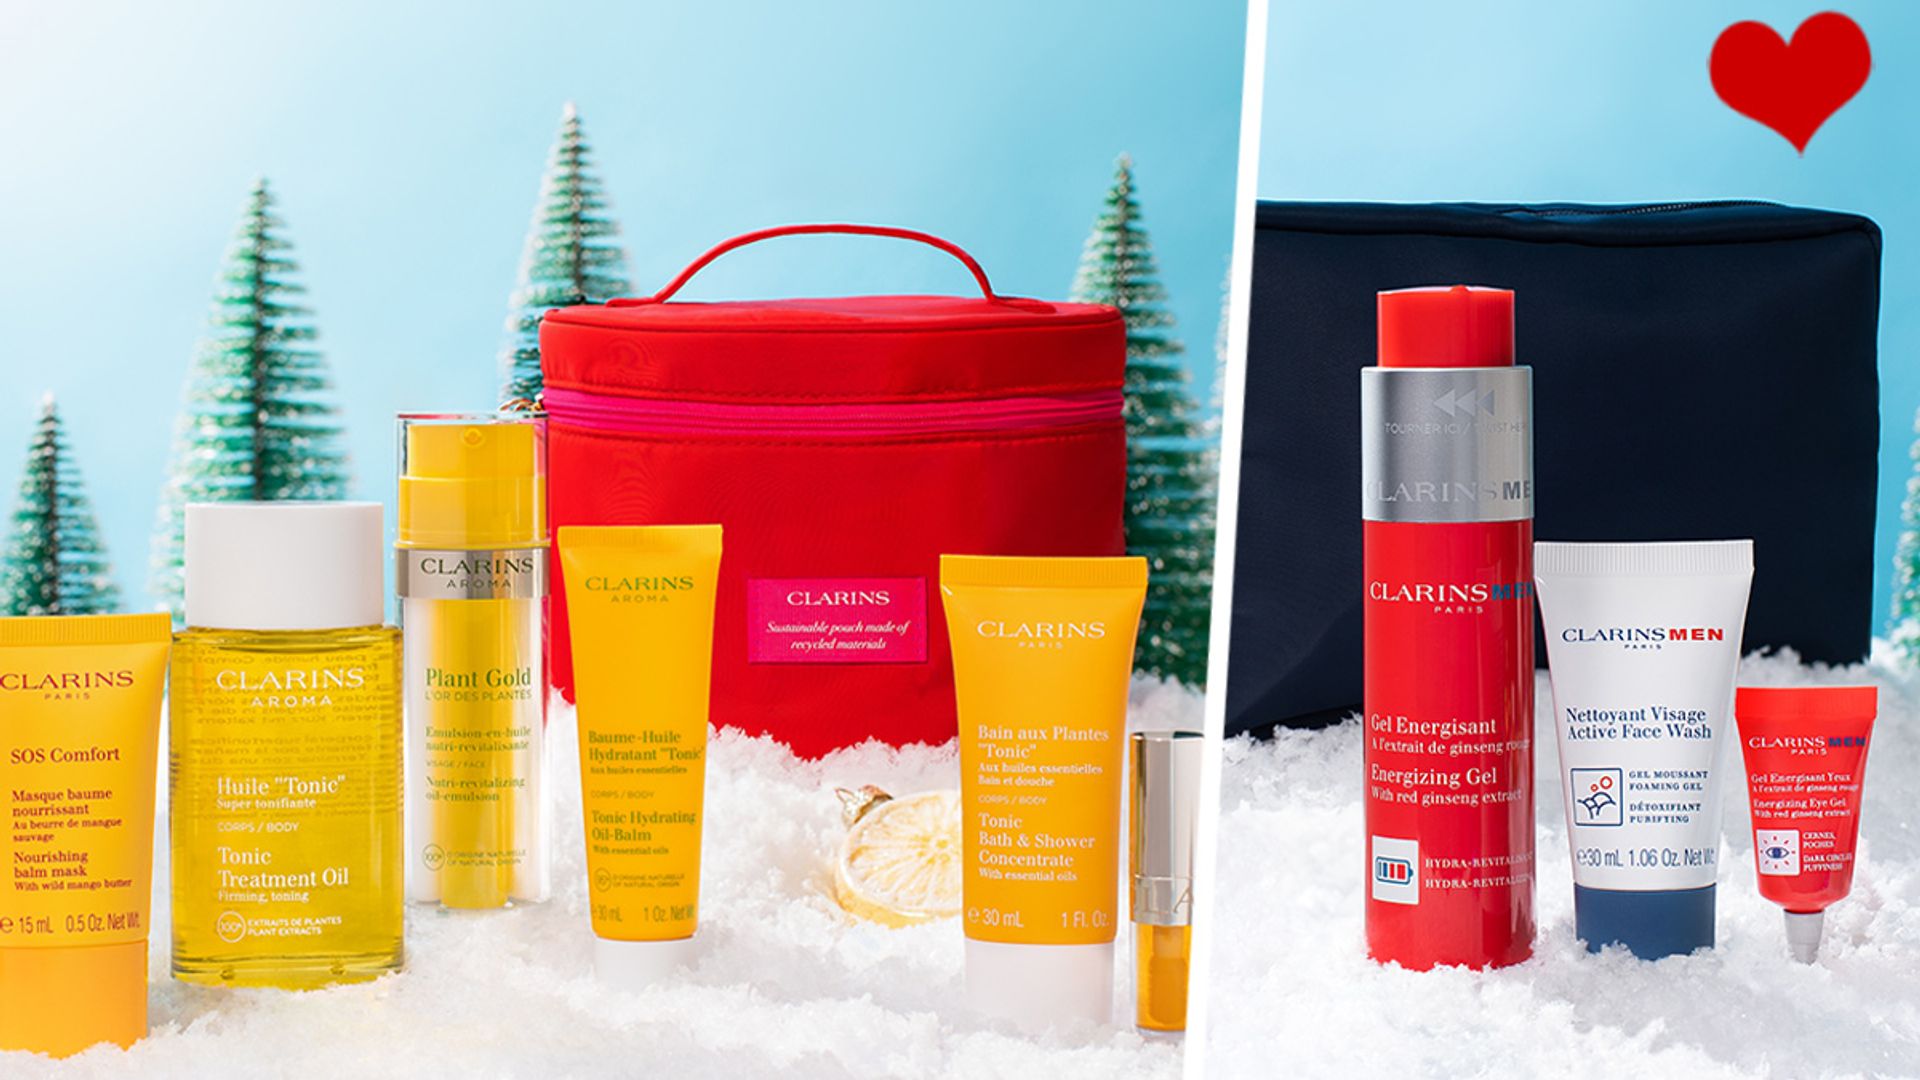 The Clarins gifts for everyone on your Christmas list - and a few treats for yourself